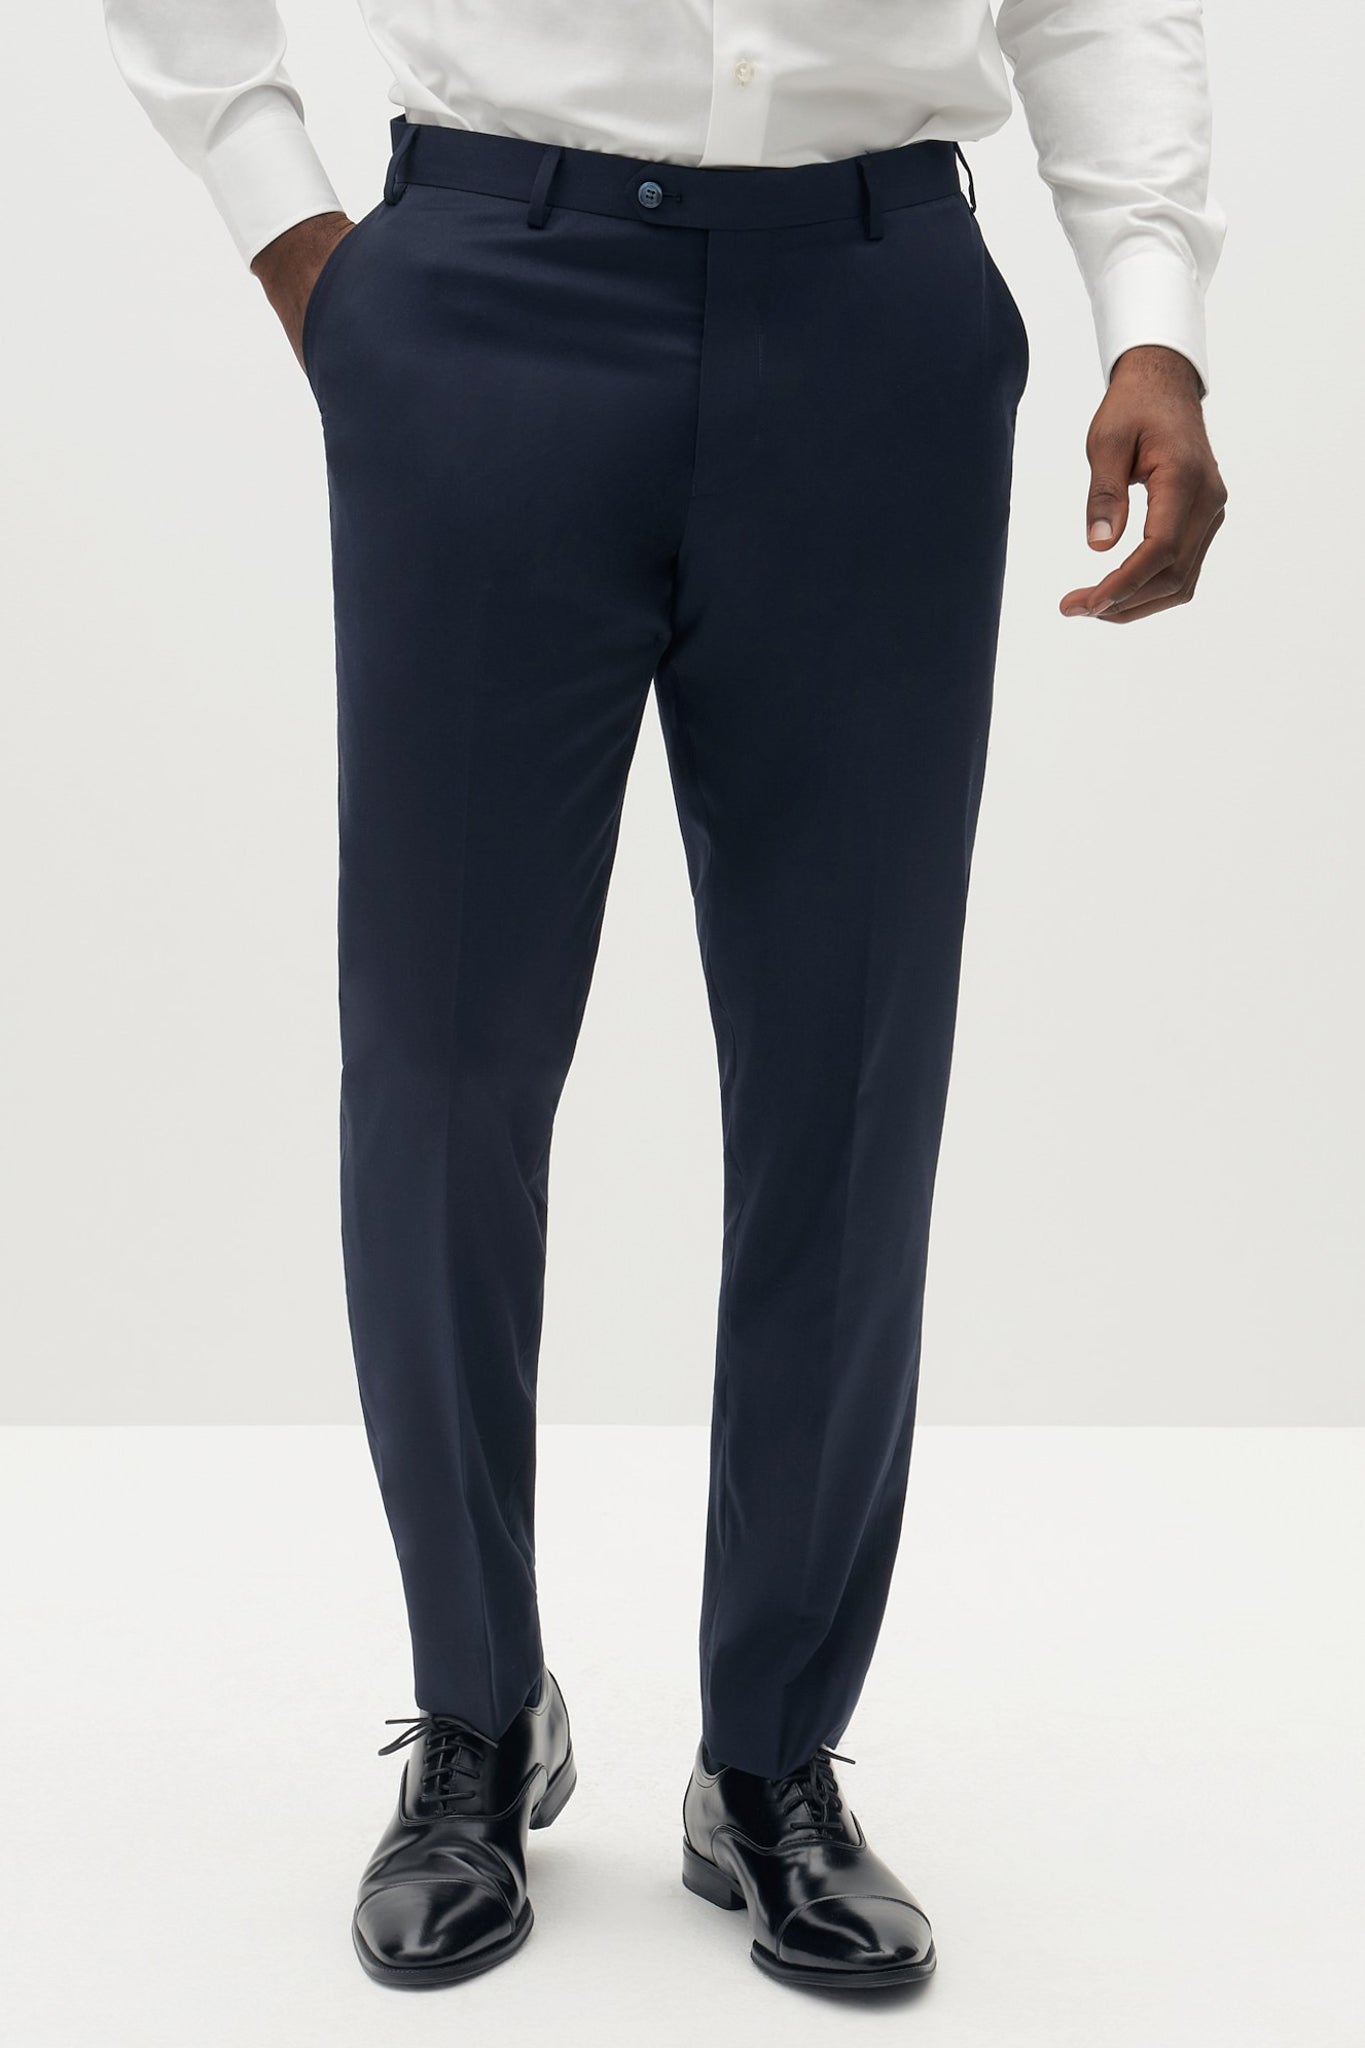 Navy Blue Trousers Ultimate Shoe Coordination Guide -